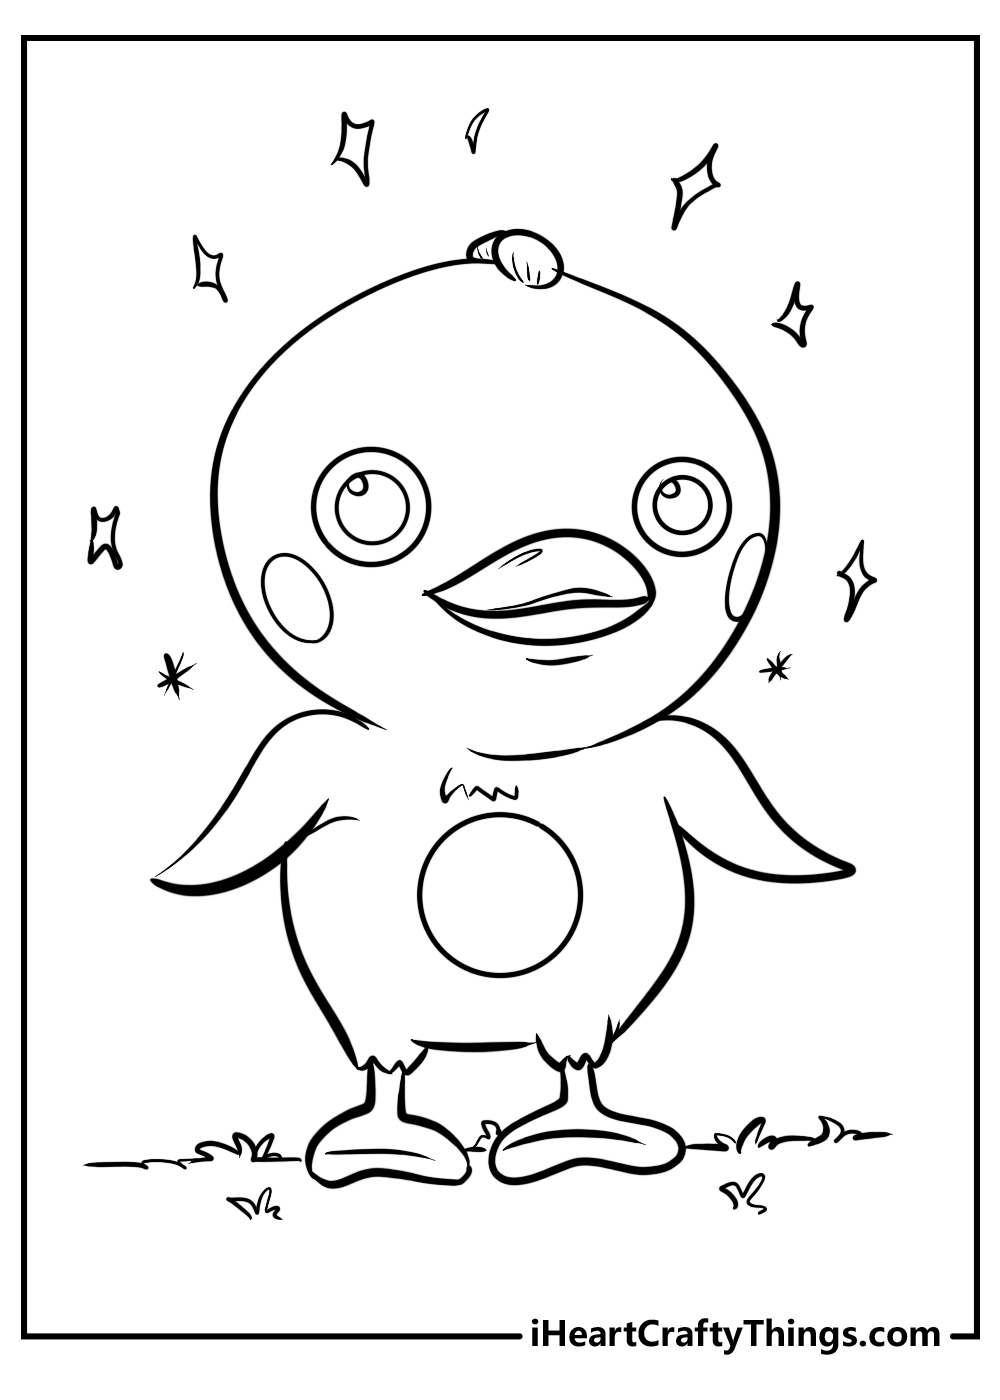 Printable coelon coloring pages updated